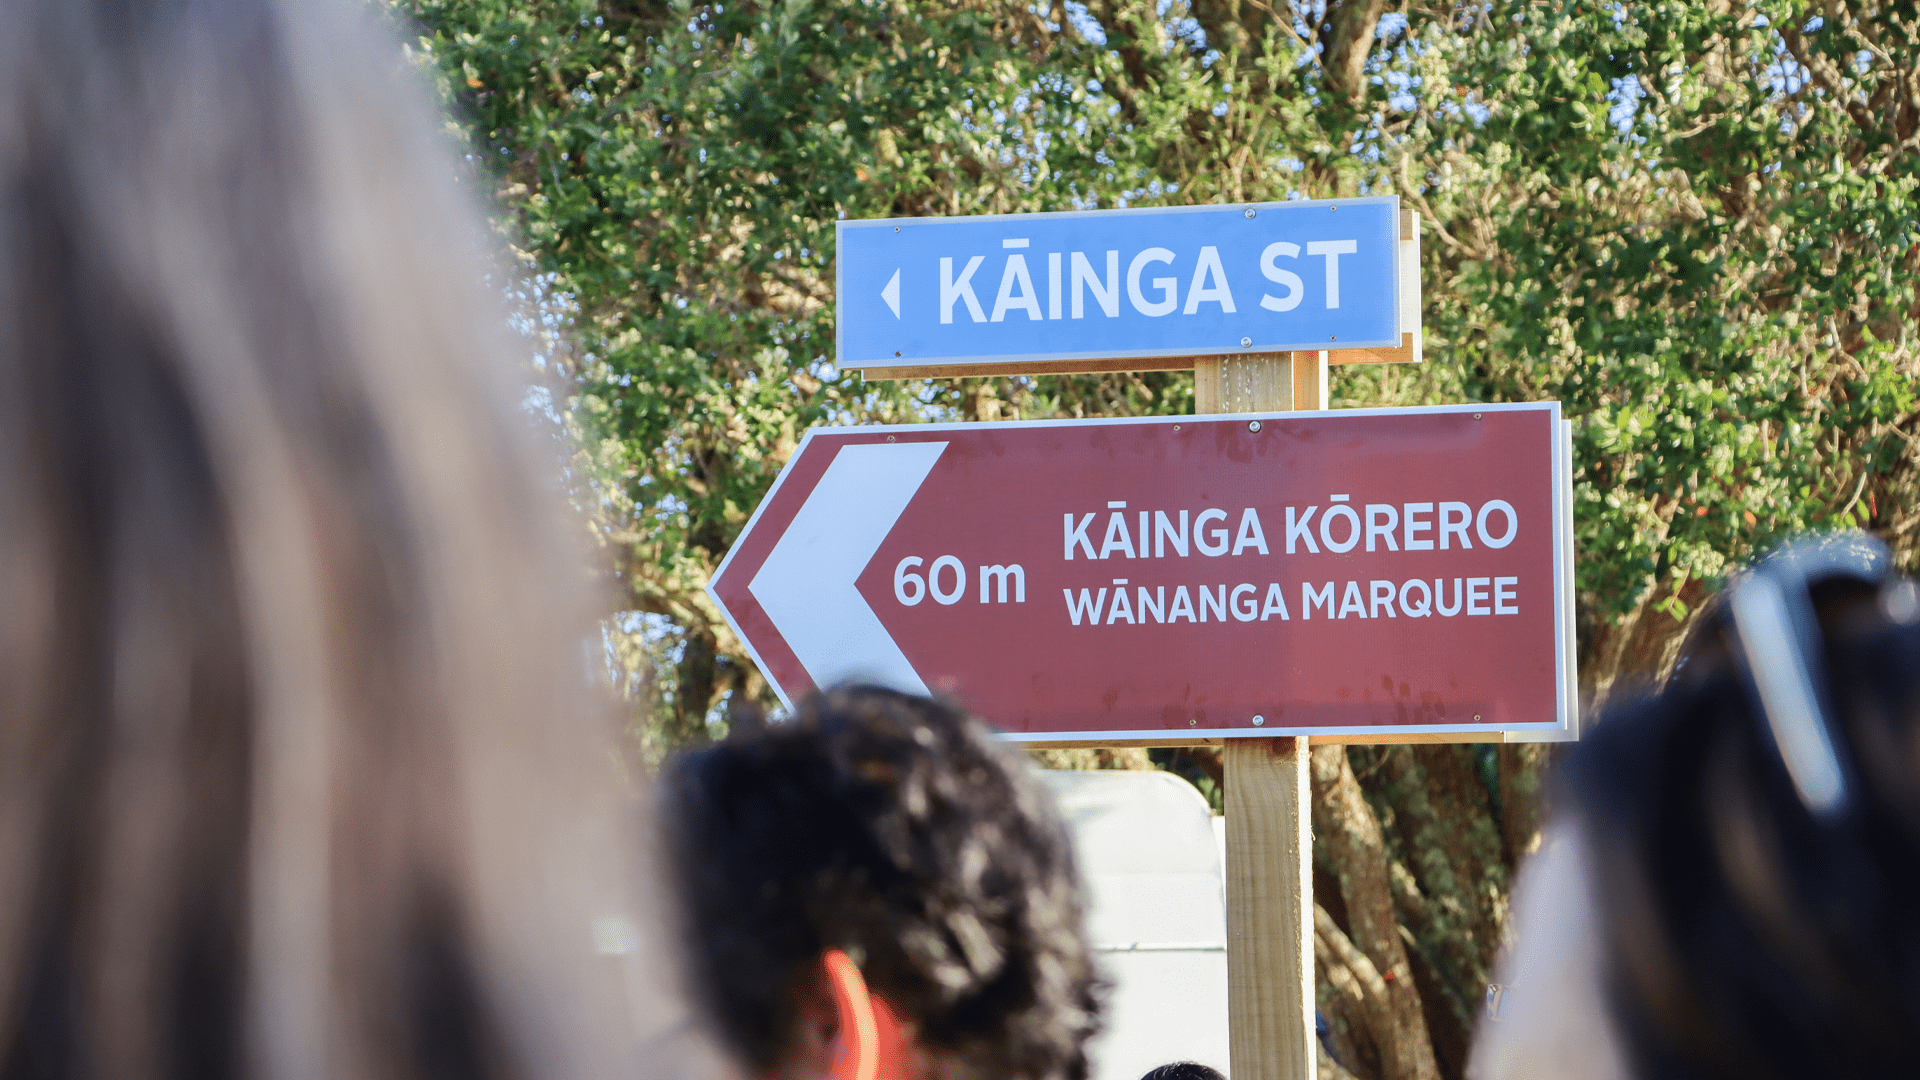 A sign points to the waitangi day expo and lane of housing stands that models a street.